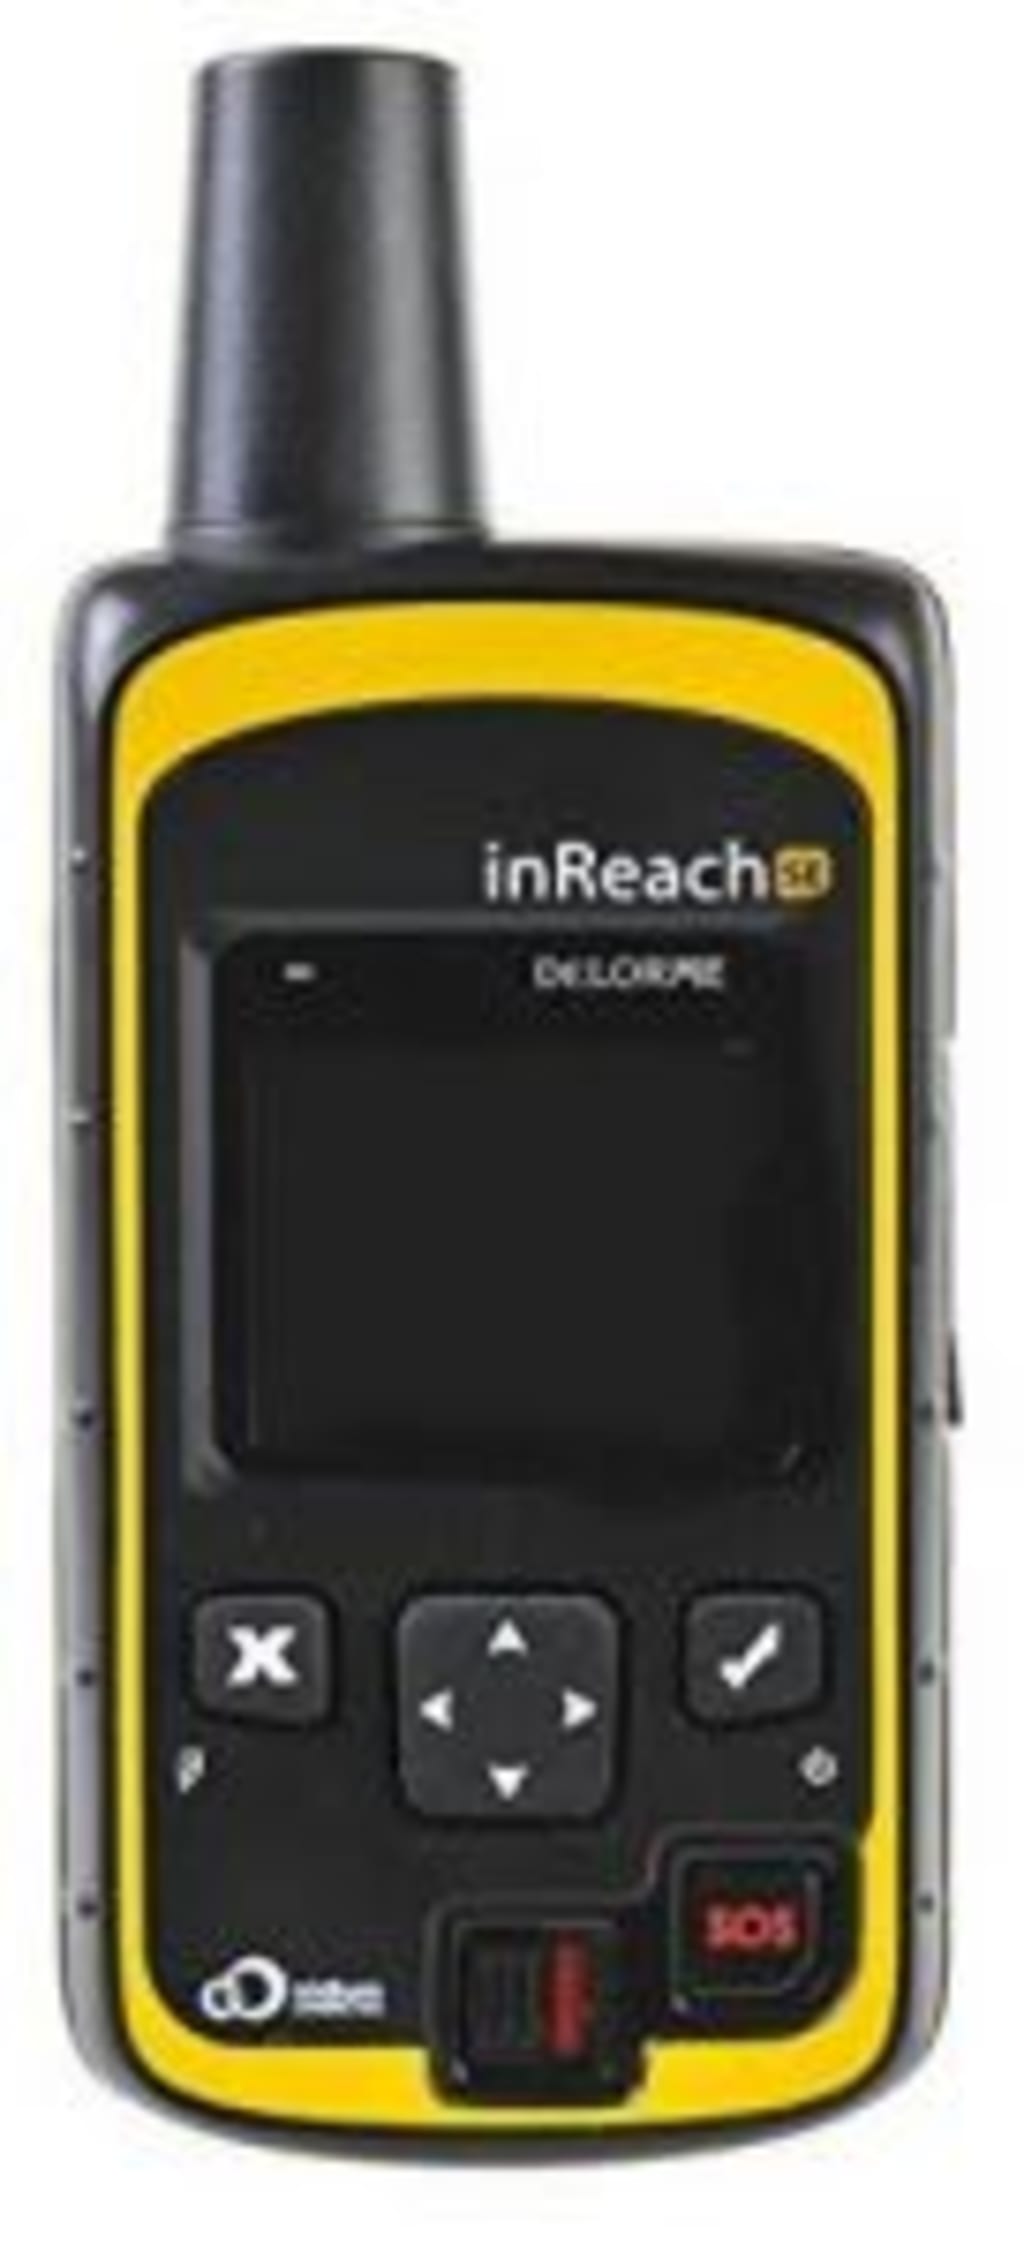 Best DeLorme inReach SE Satellite Tracker Price & Reviews in Malaysia 2021